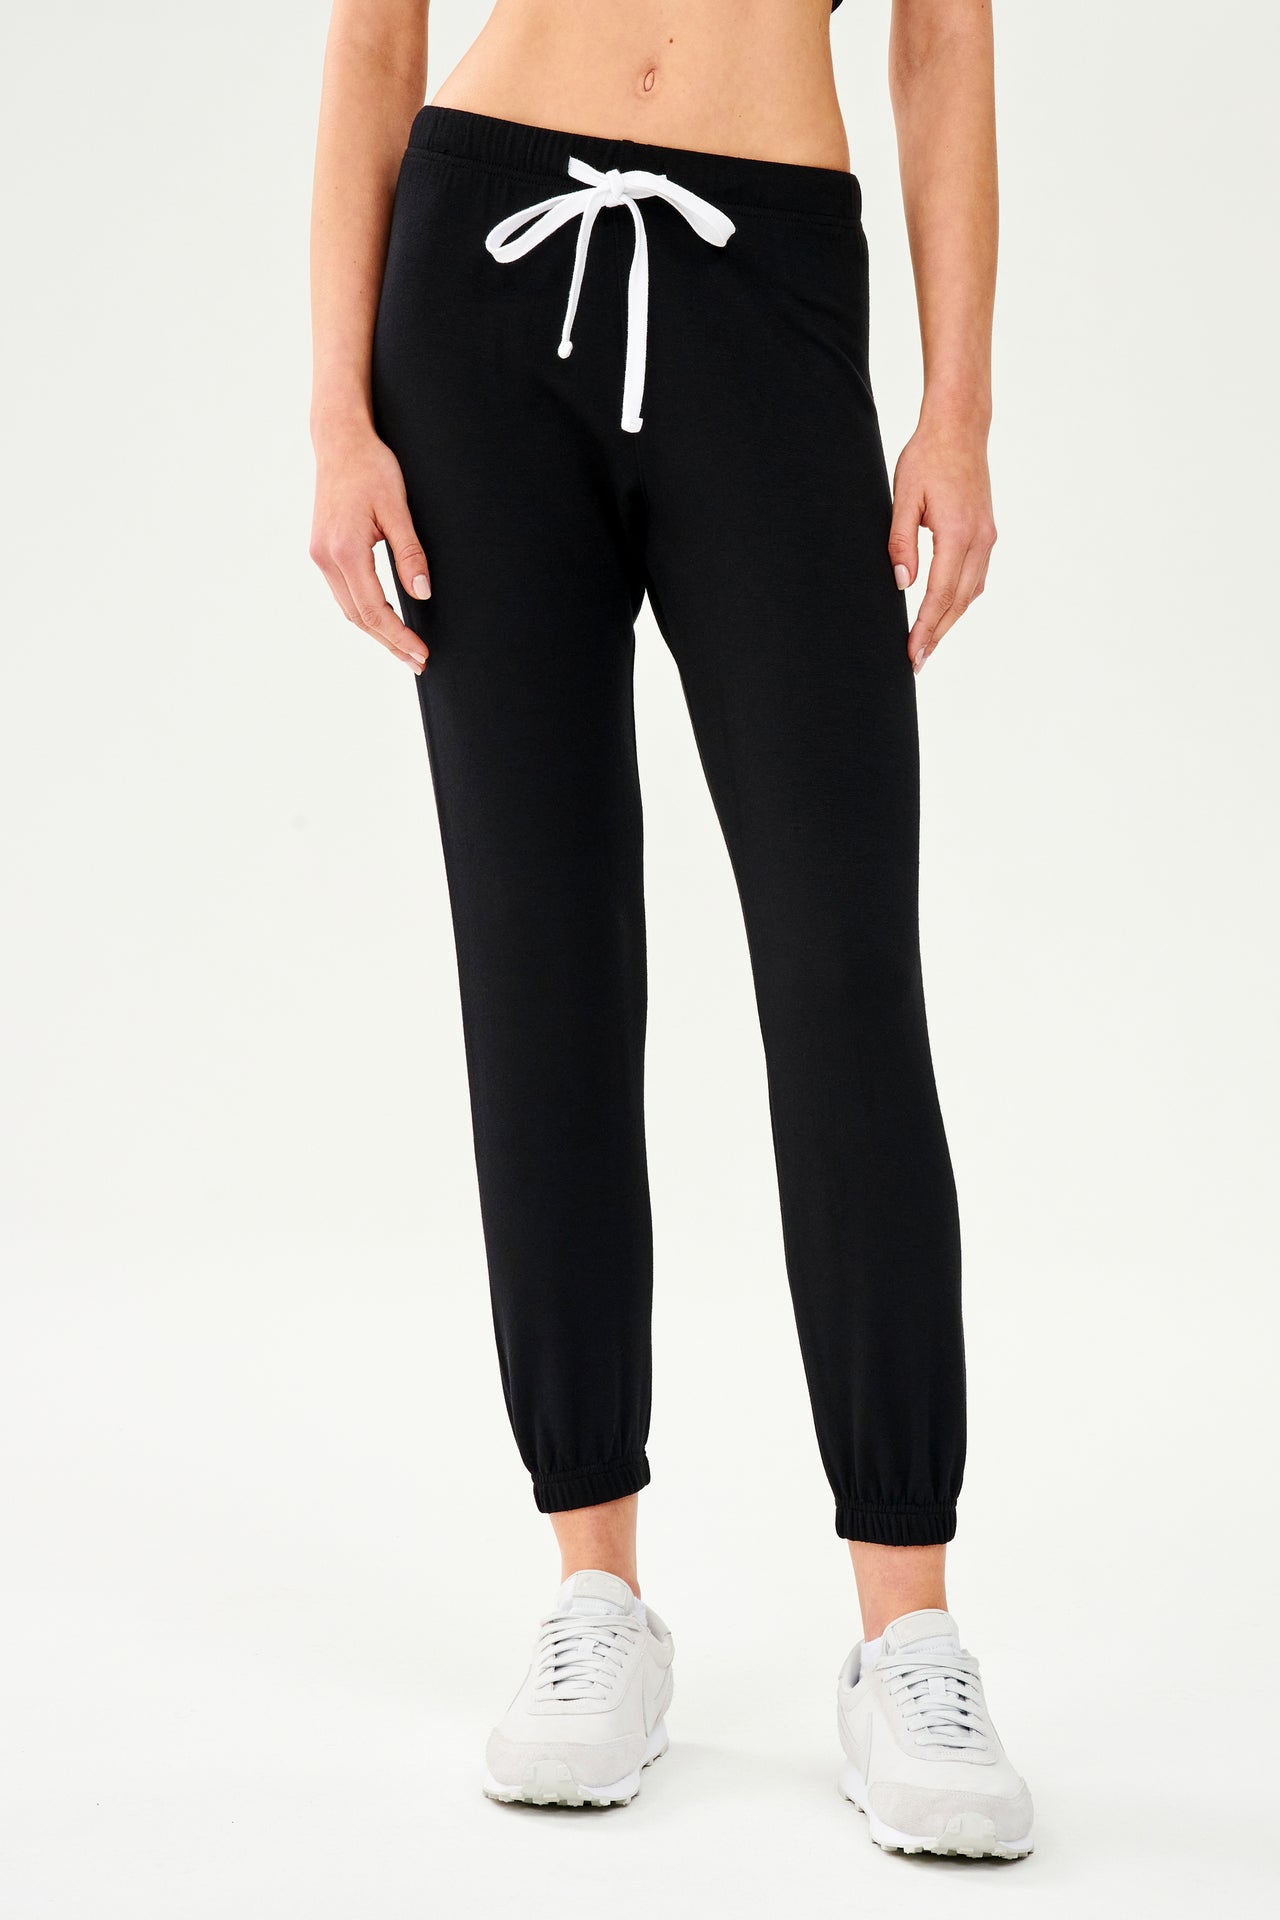 Front view of woman wearing black jogger sweatpant with white drawstring paired with white shoes